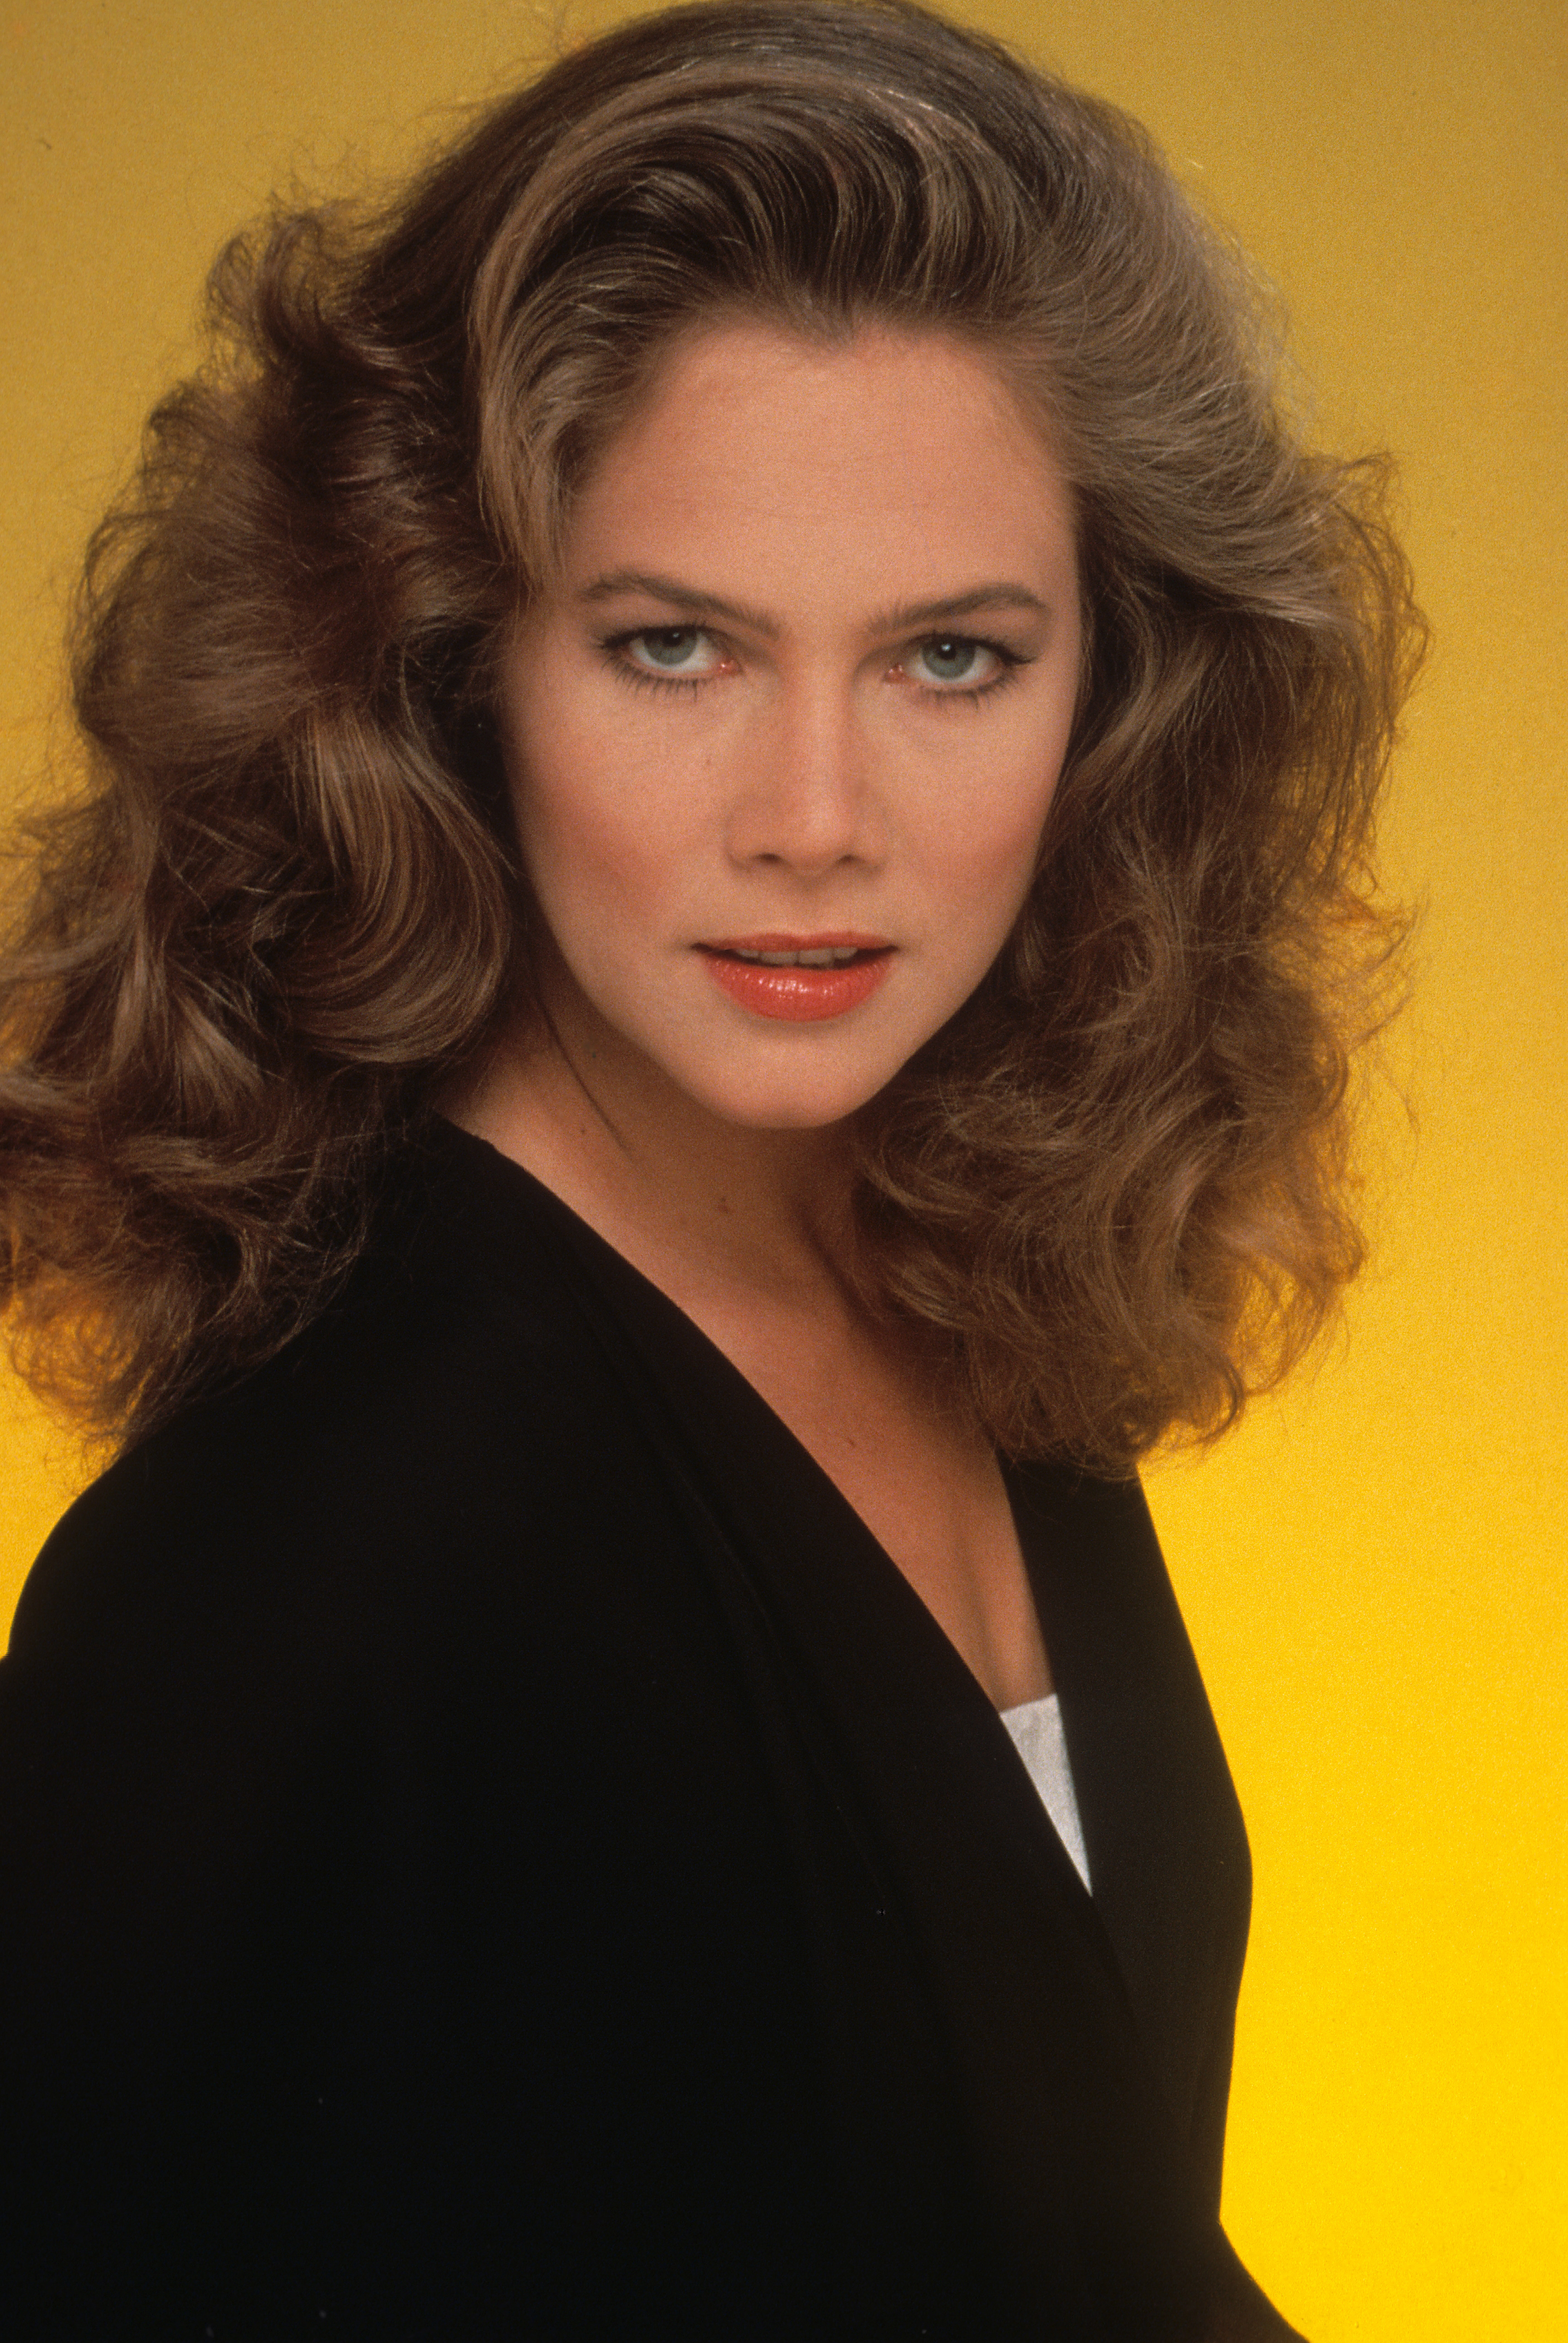 Kathleen Turner photographed in 1983 | Source: Getty Images